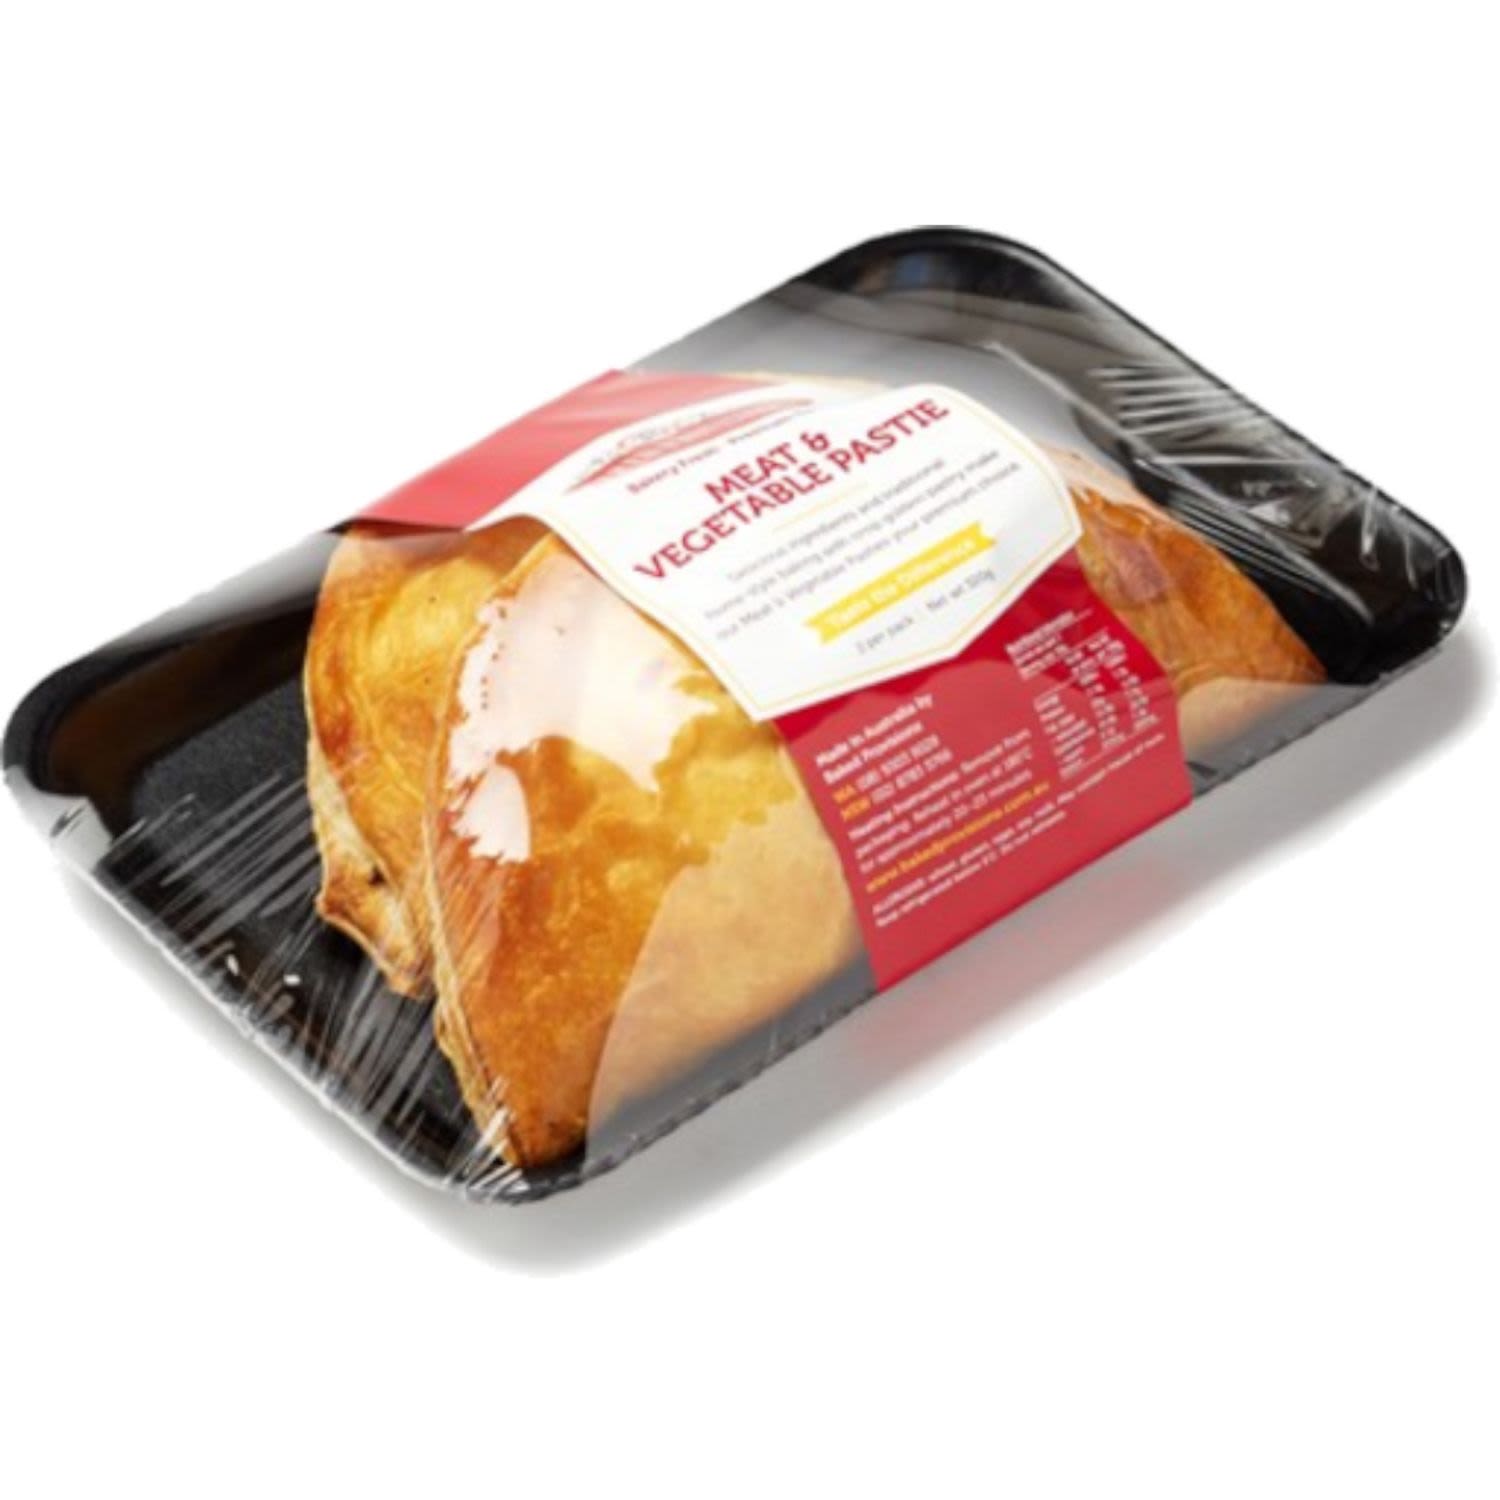 Baked Provisions Meat & Vegetable Pastie, 2 Each